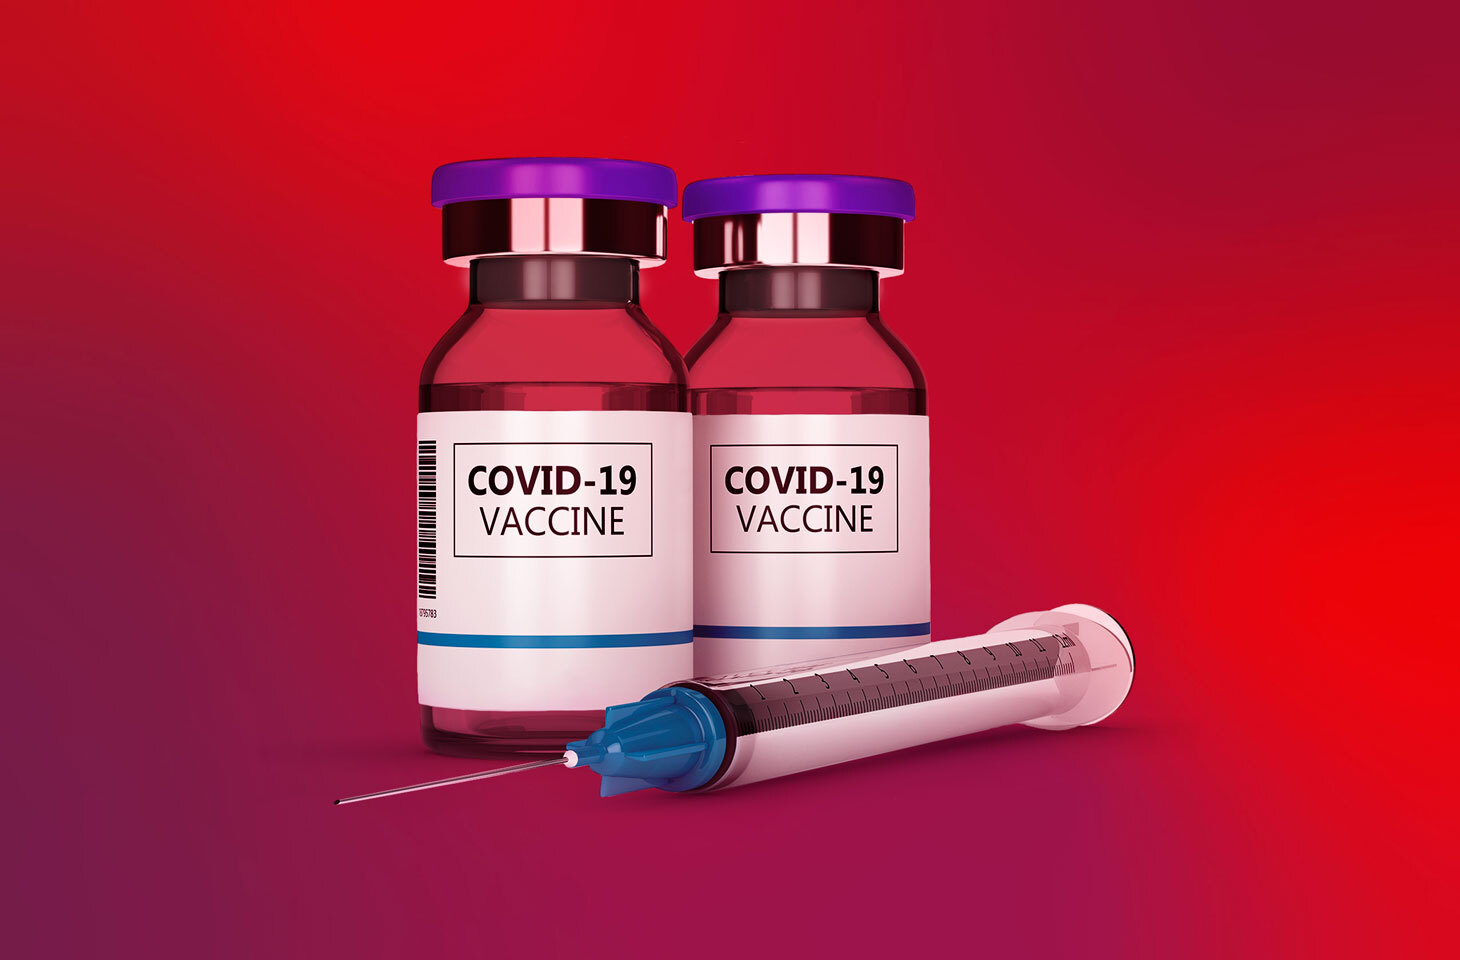 What could possibly go wrong with coronavirus vaccine from a darknet marketplace?